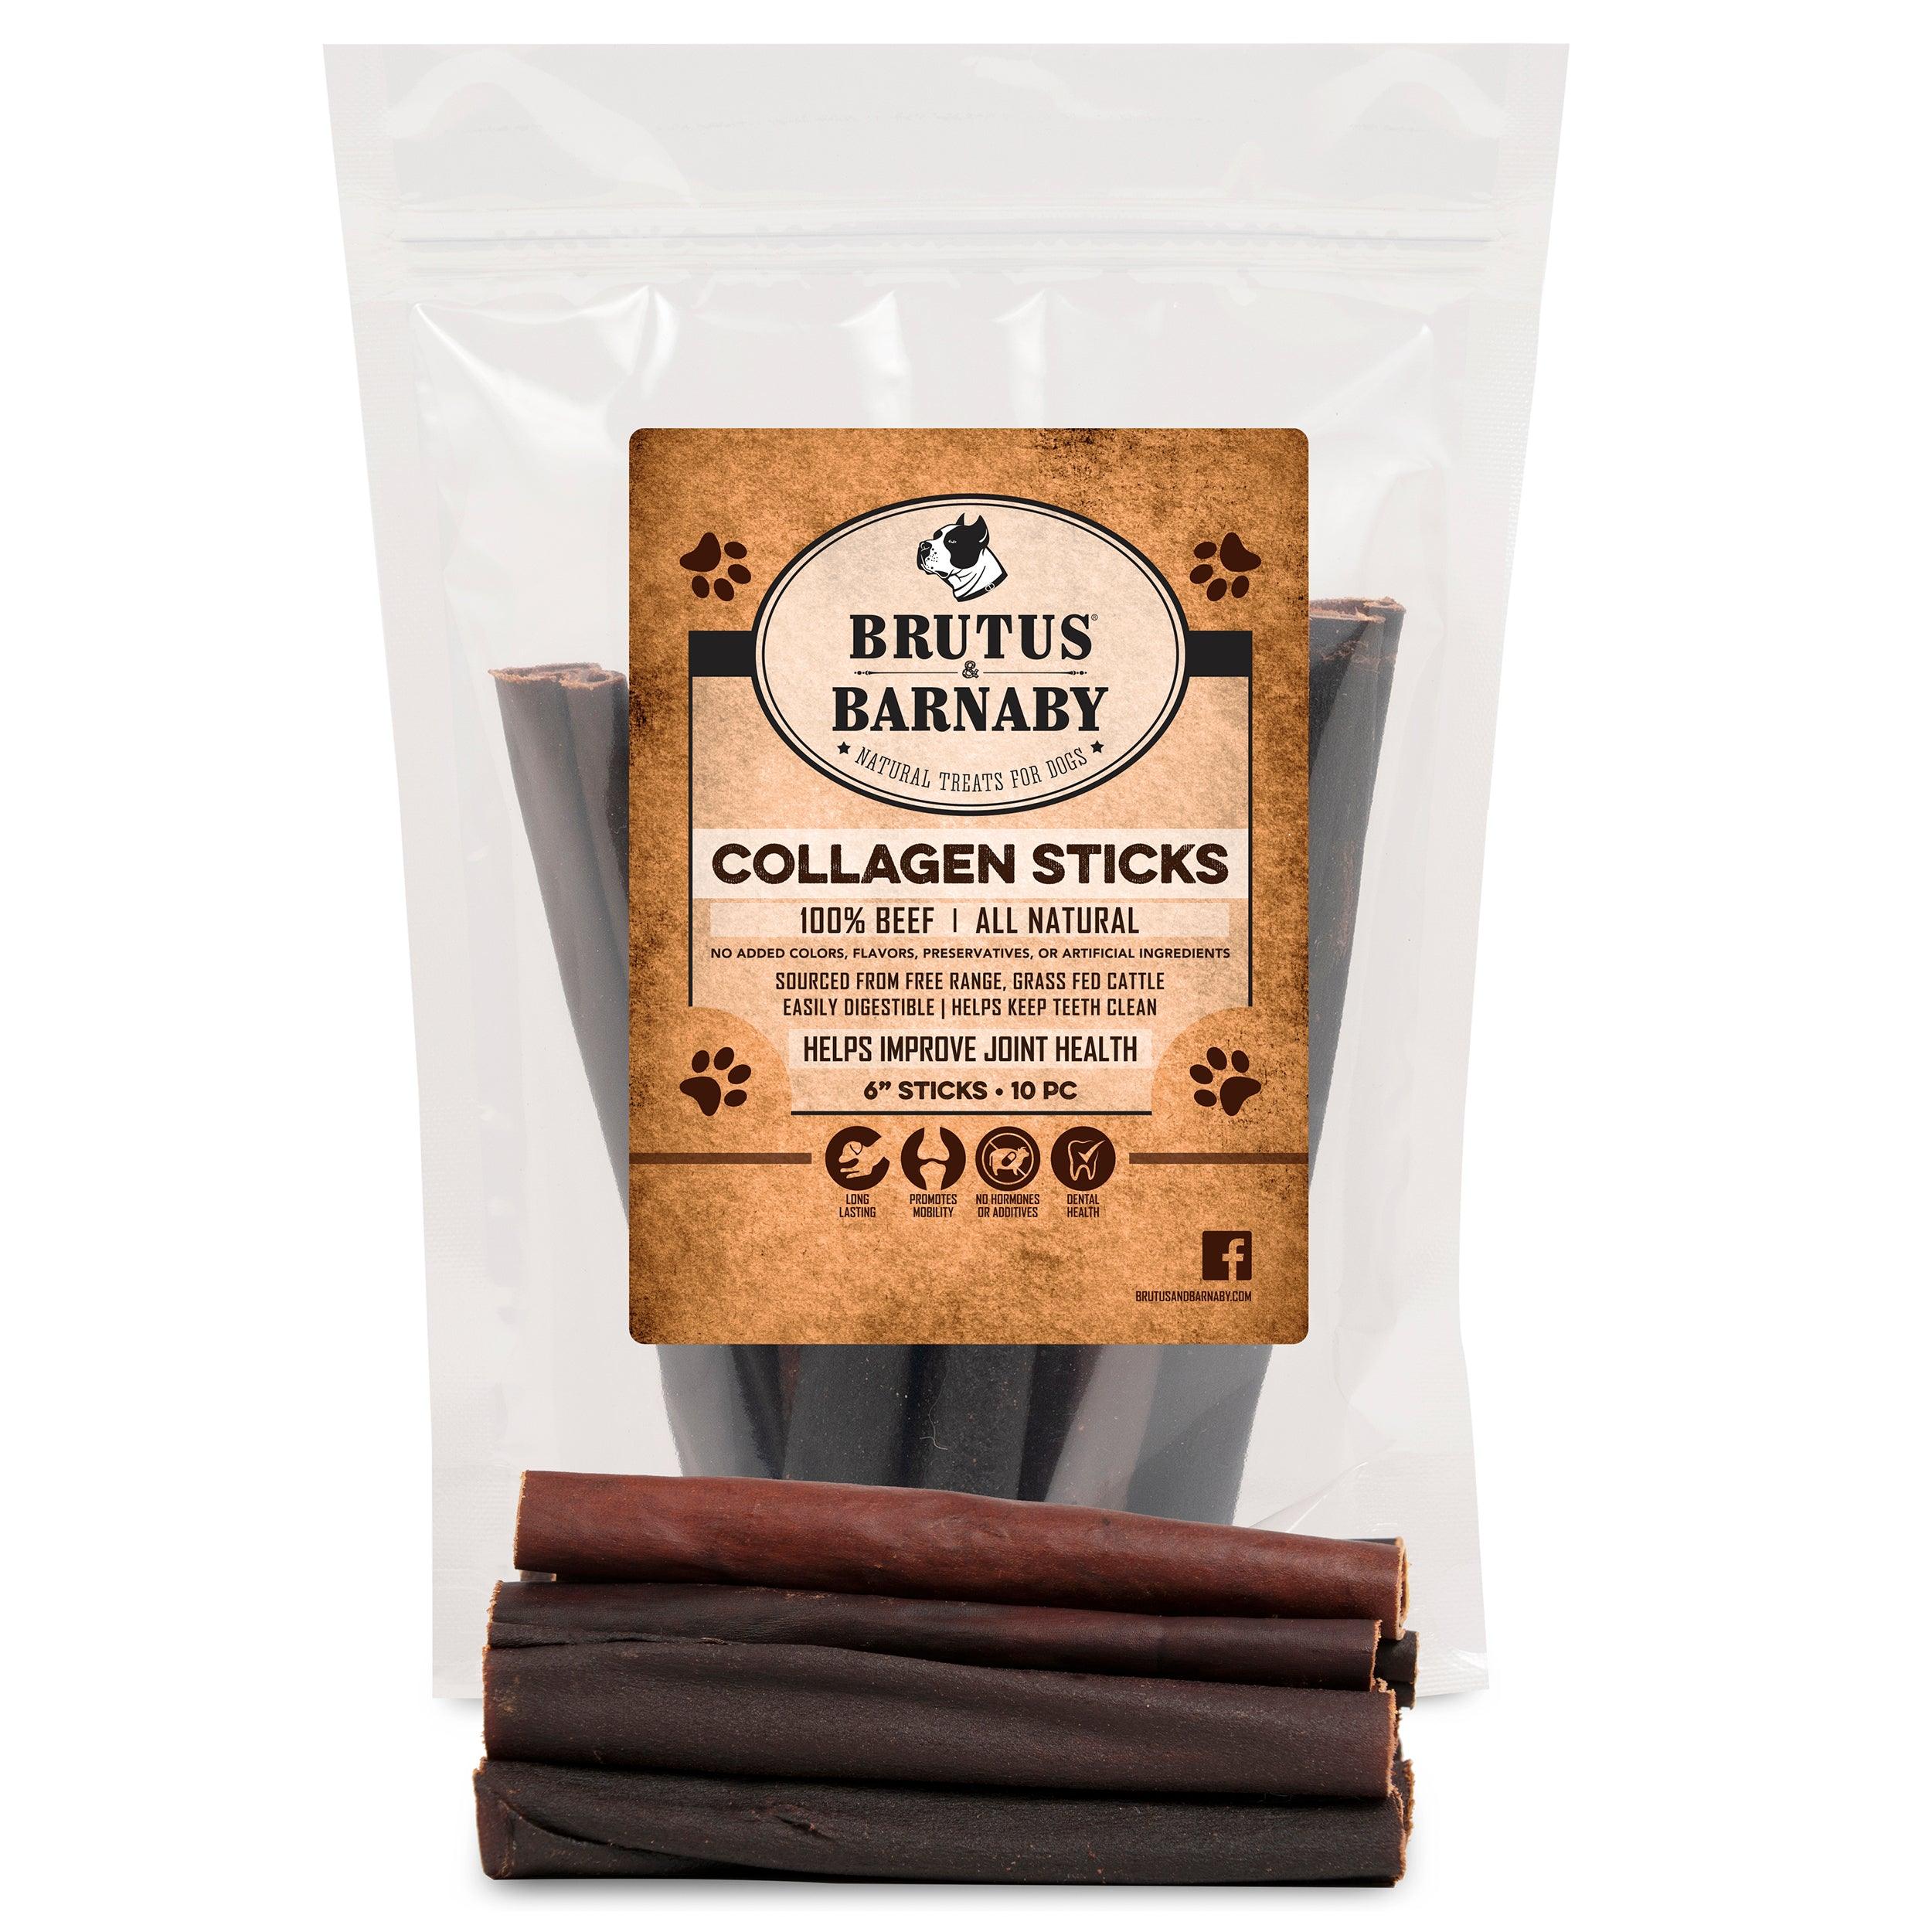 Beef Collagen Sticks For Dogs - Long Lasting Chew - Brutus & Barnaby